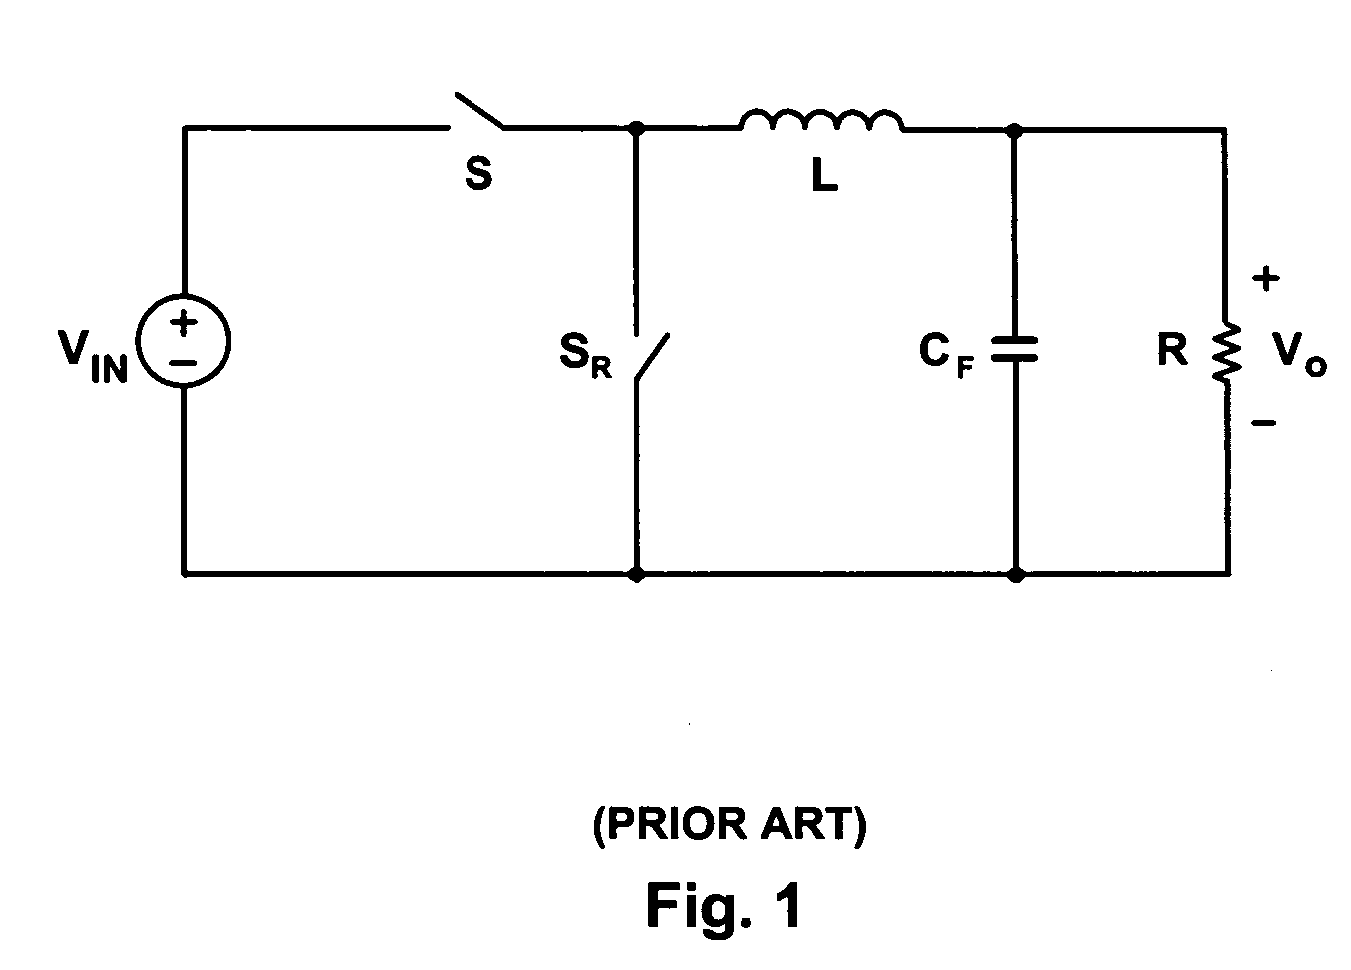 Non-isolated power conversion system having multiple switching power converters